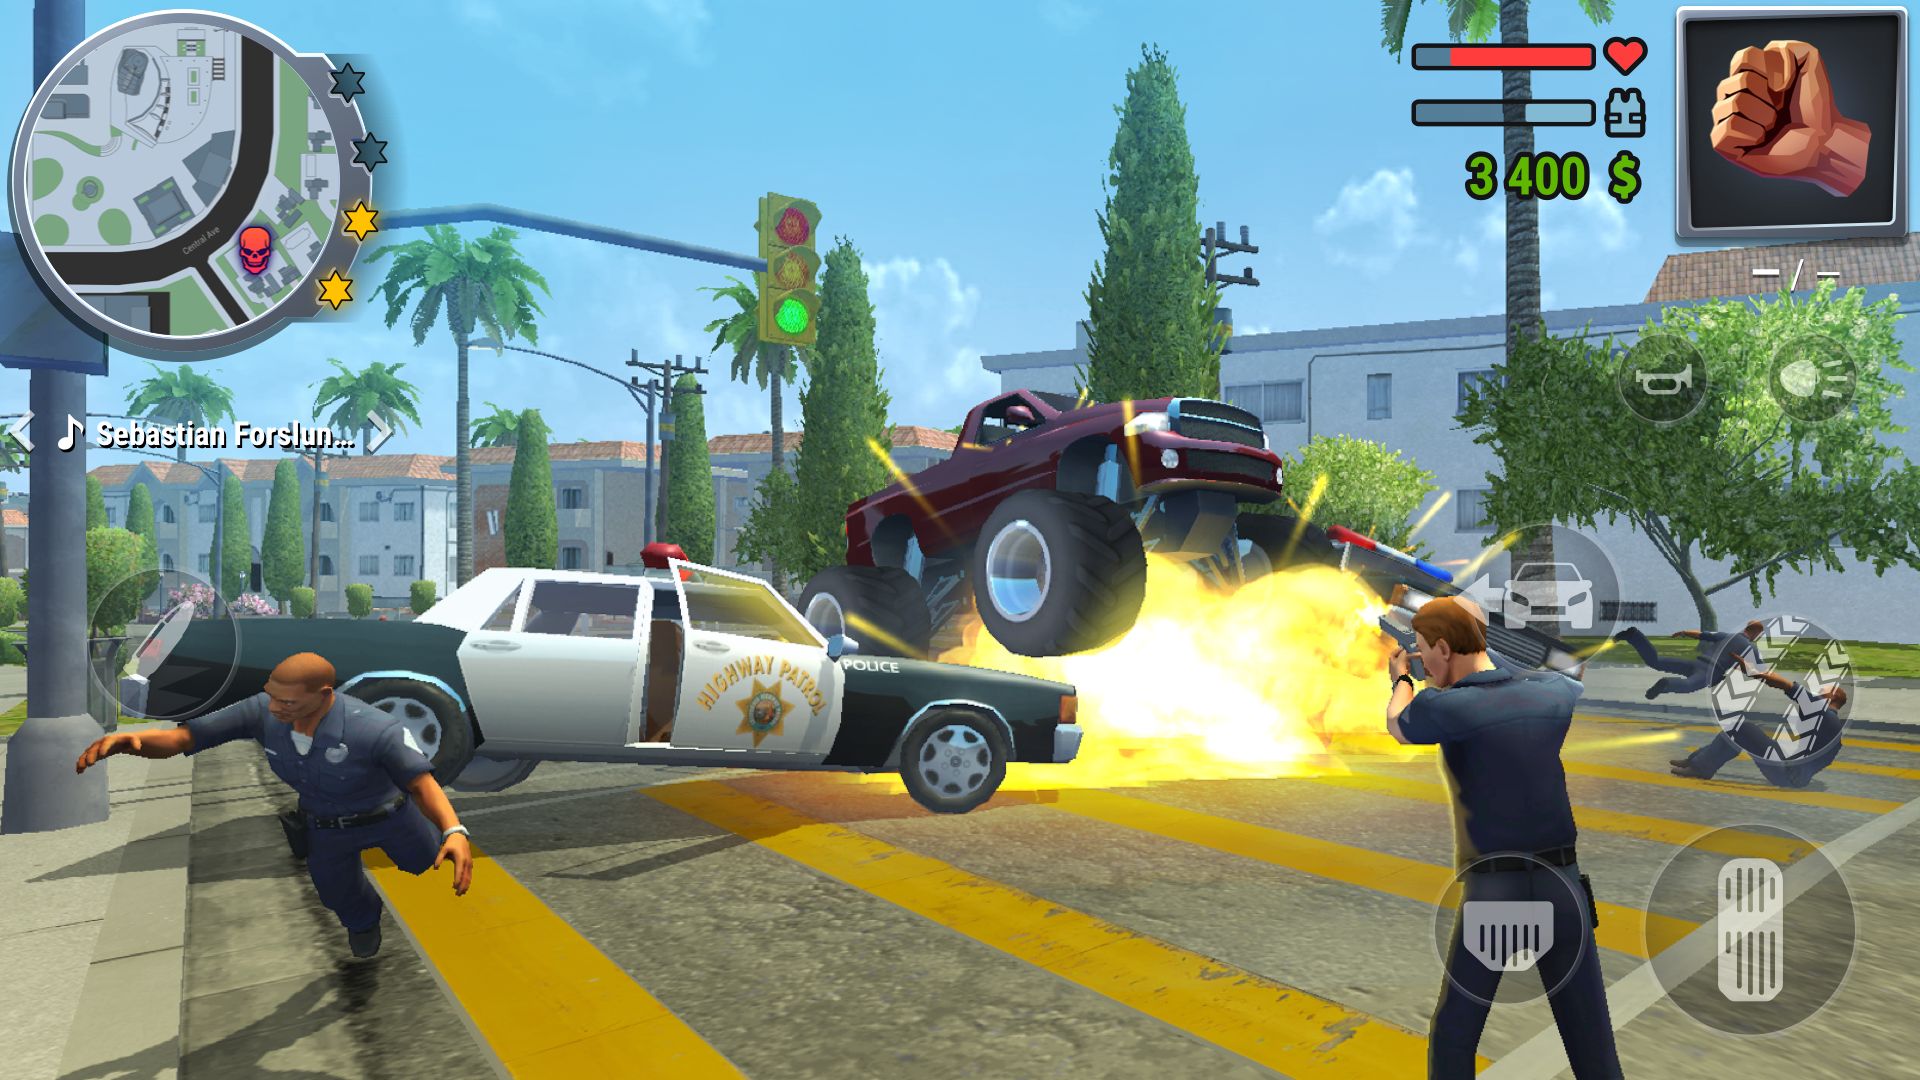 New Open World Game Like GTA For Android